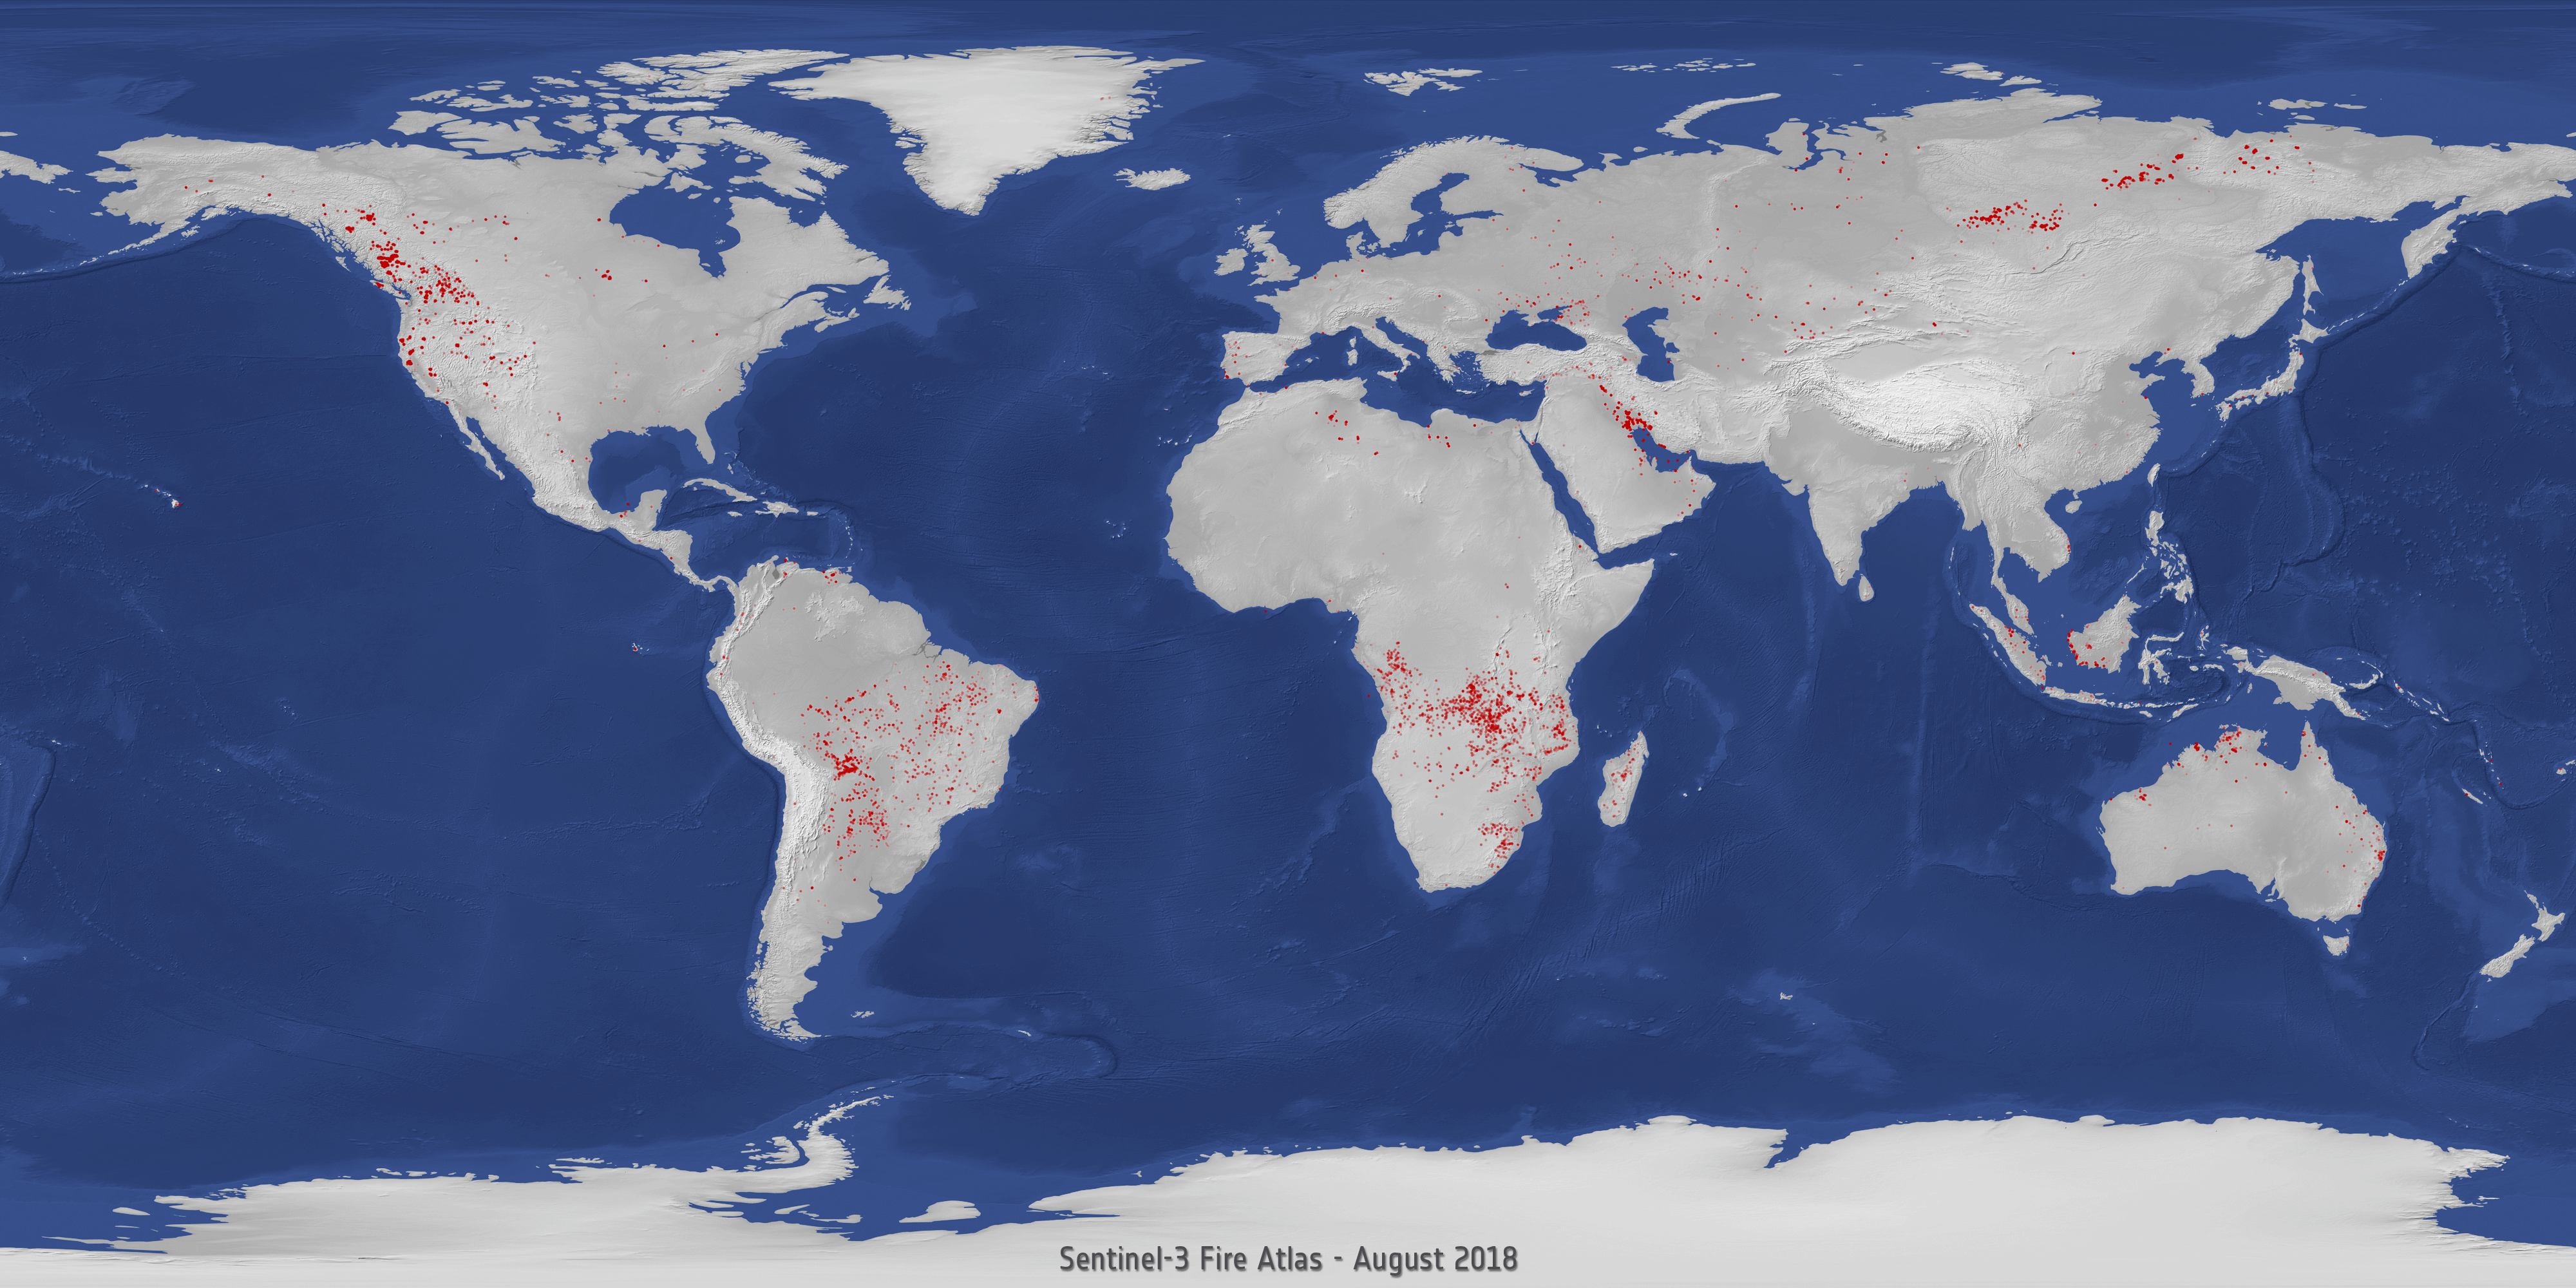 Figure 2: Fires around the world. Global fires detected in August 2018 compared to August 2019. The Sentinel-3 World Fire Atlas recorded 79,000 wildfires in August 2019, compared to just over 16,000 fires during the same period in 2018 (image credit: ESA, the image contains modified Copernicus Sentinel data (2019), processed by ESA on ONDA Copernicus DIAS)